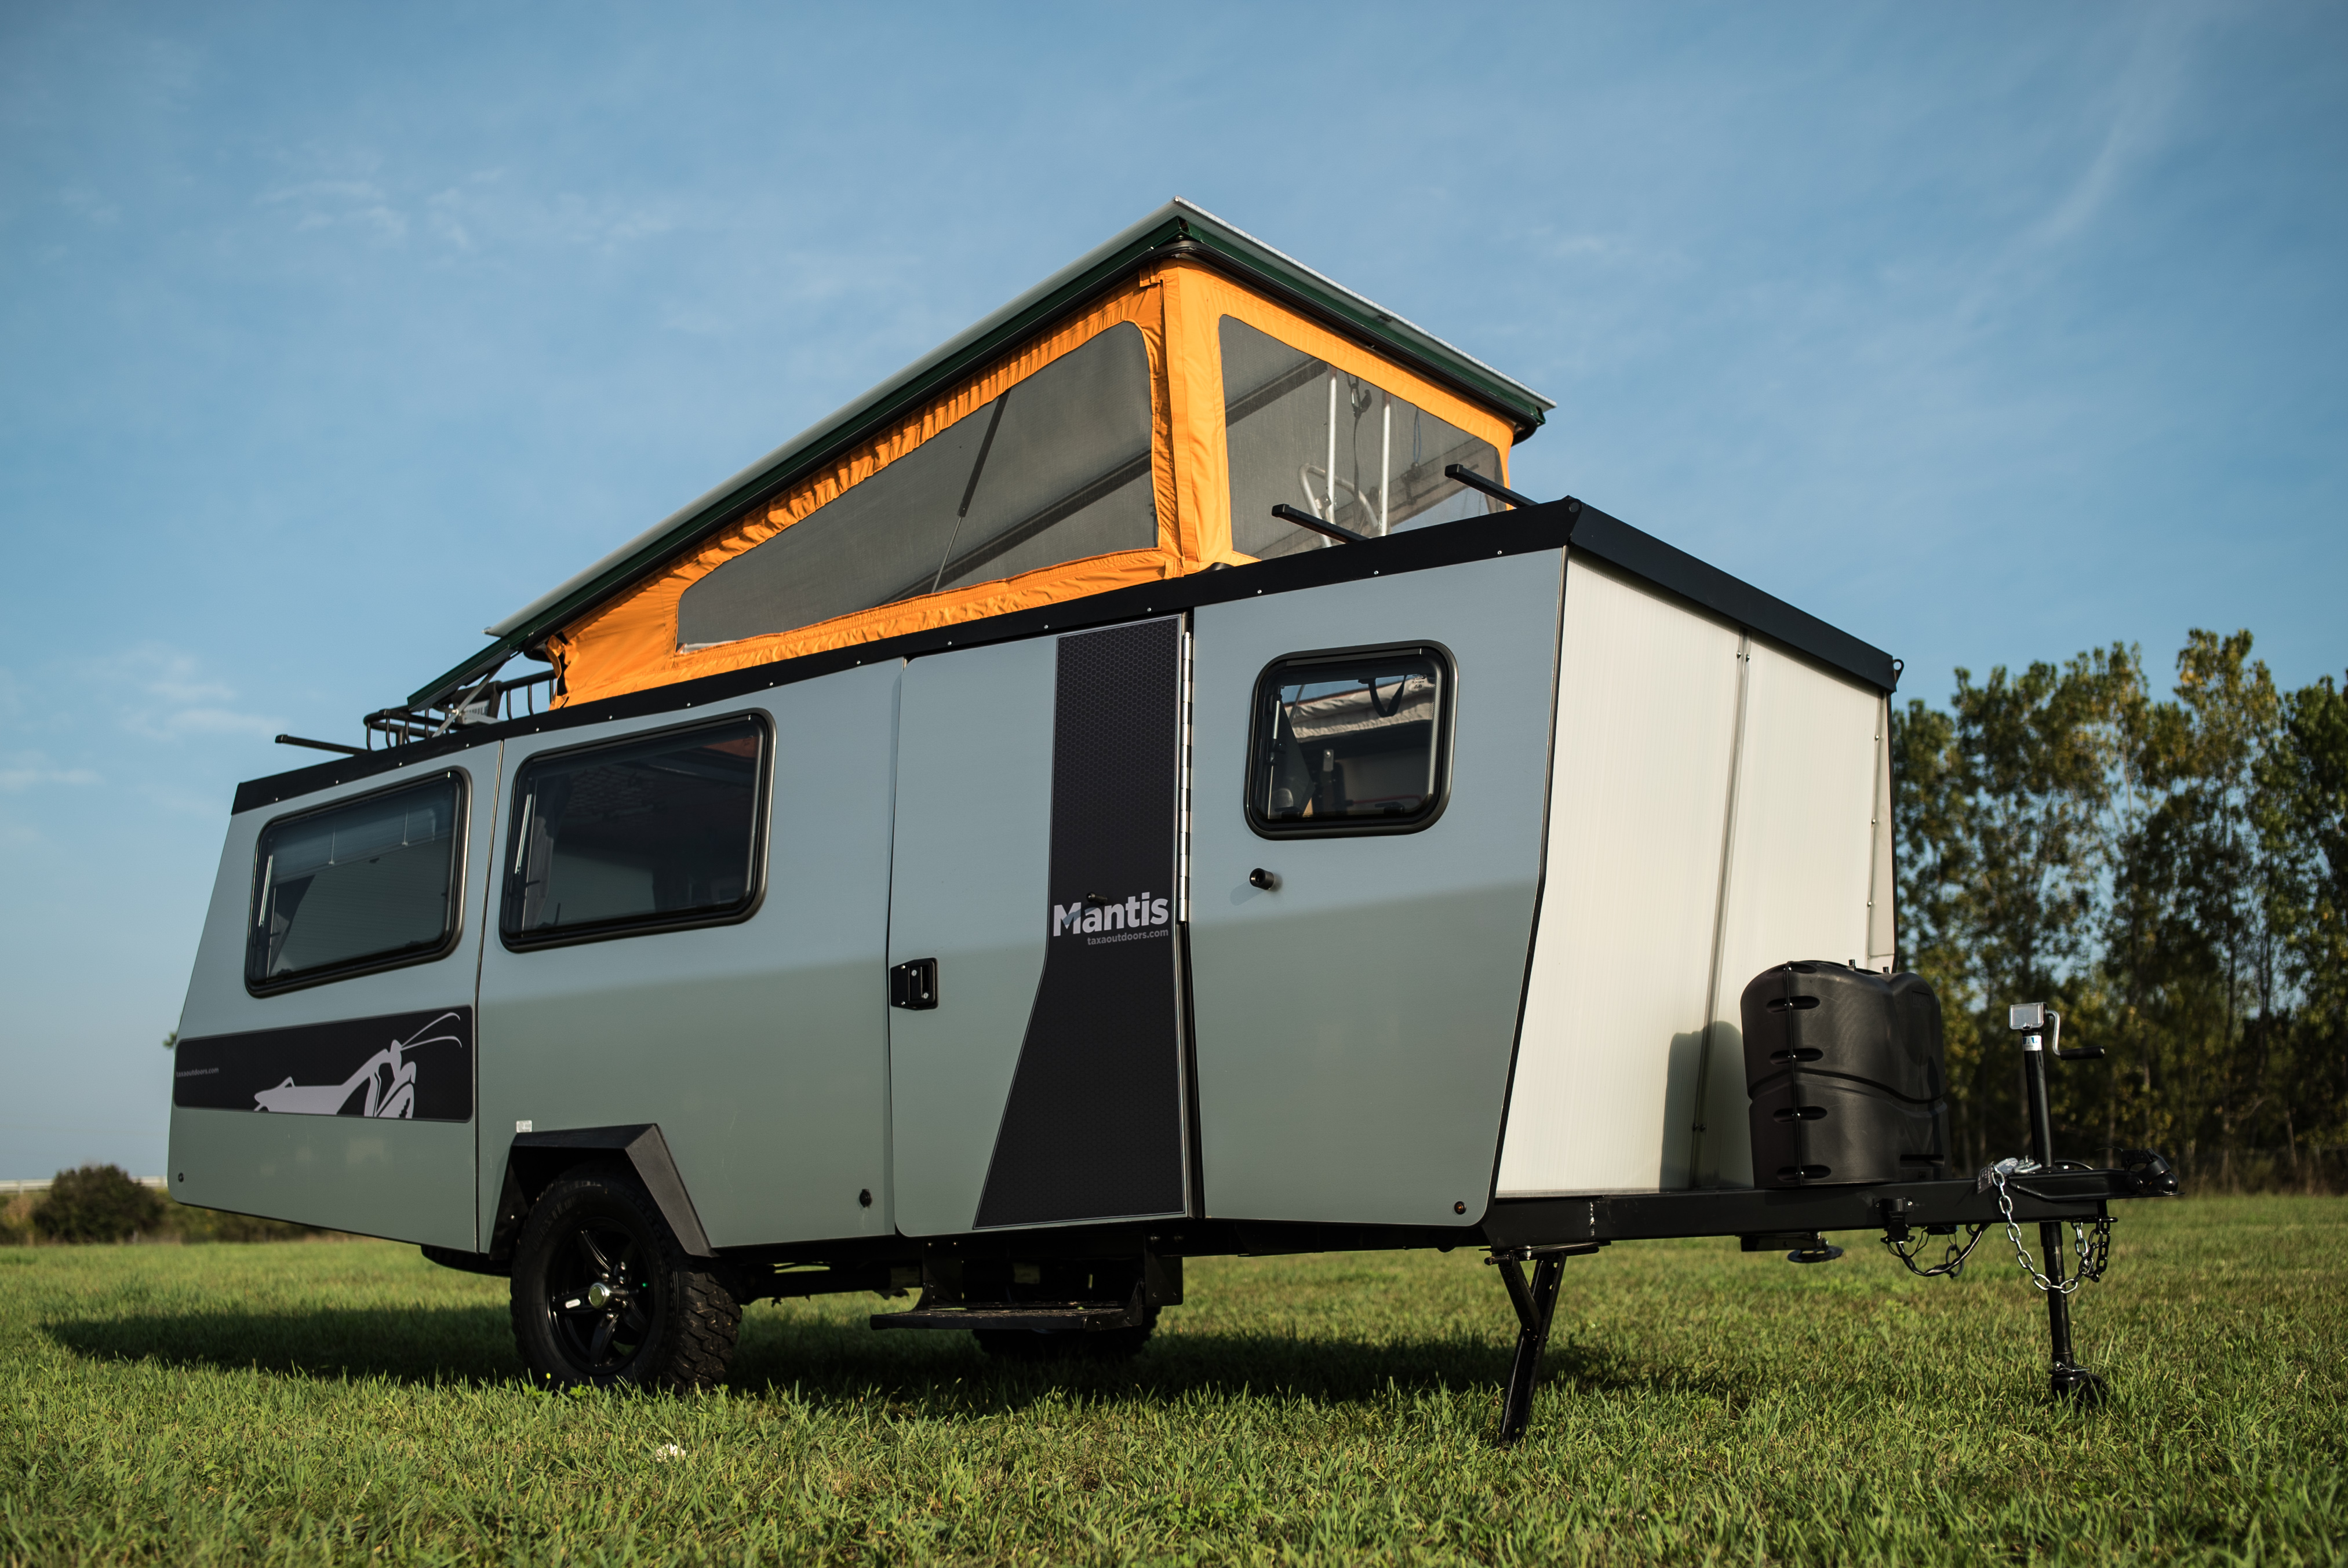 A white and tan camper with an inflatable orange tent on top of the camper. The camper is parked in a grassy field.